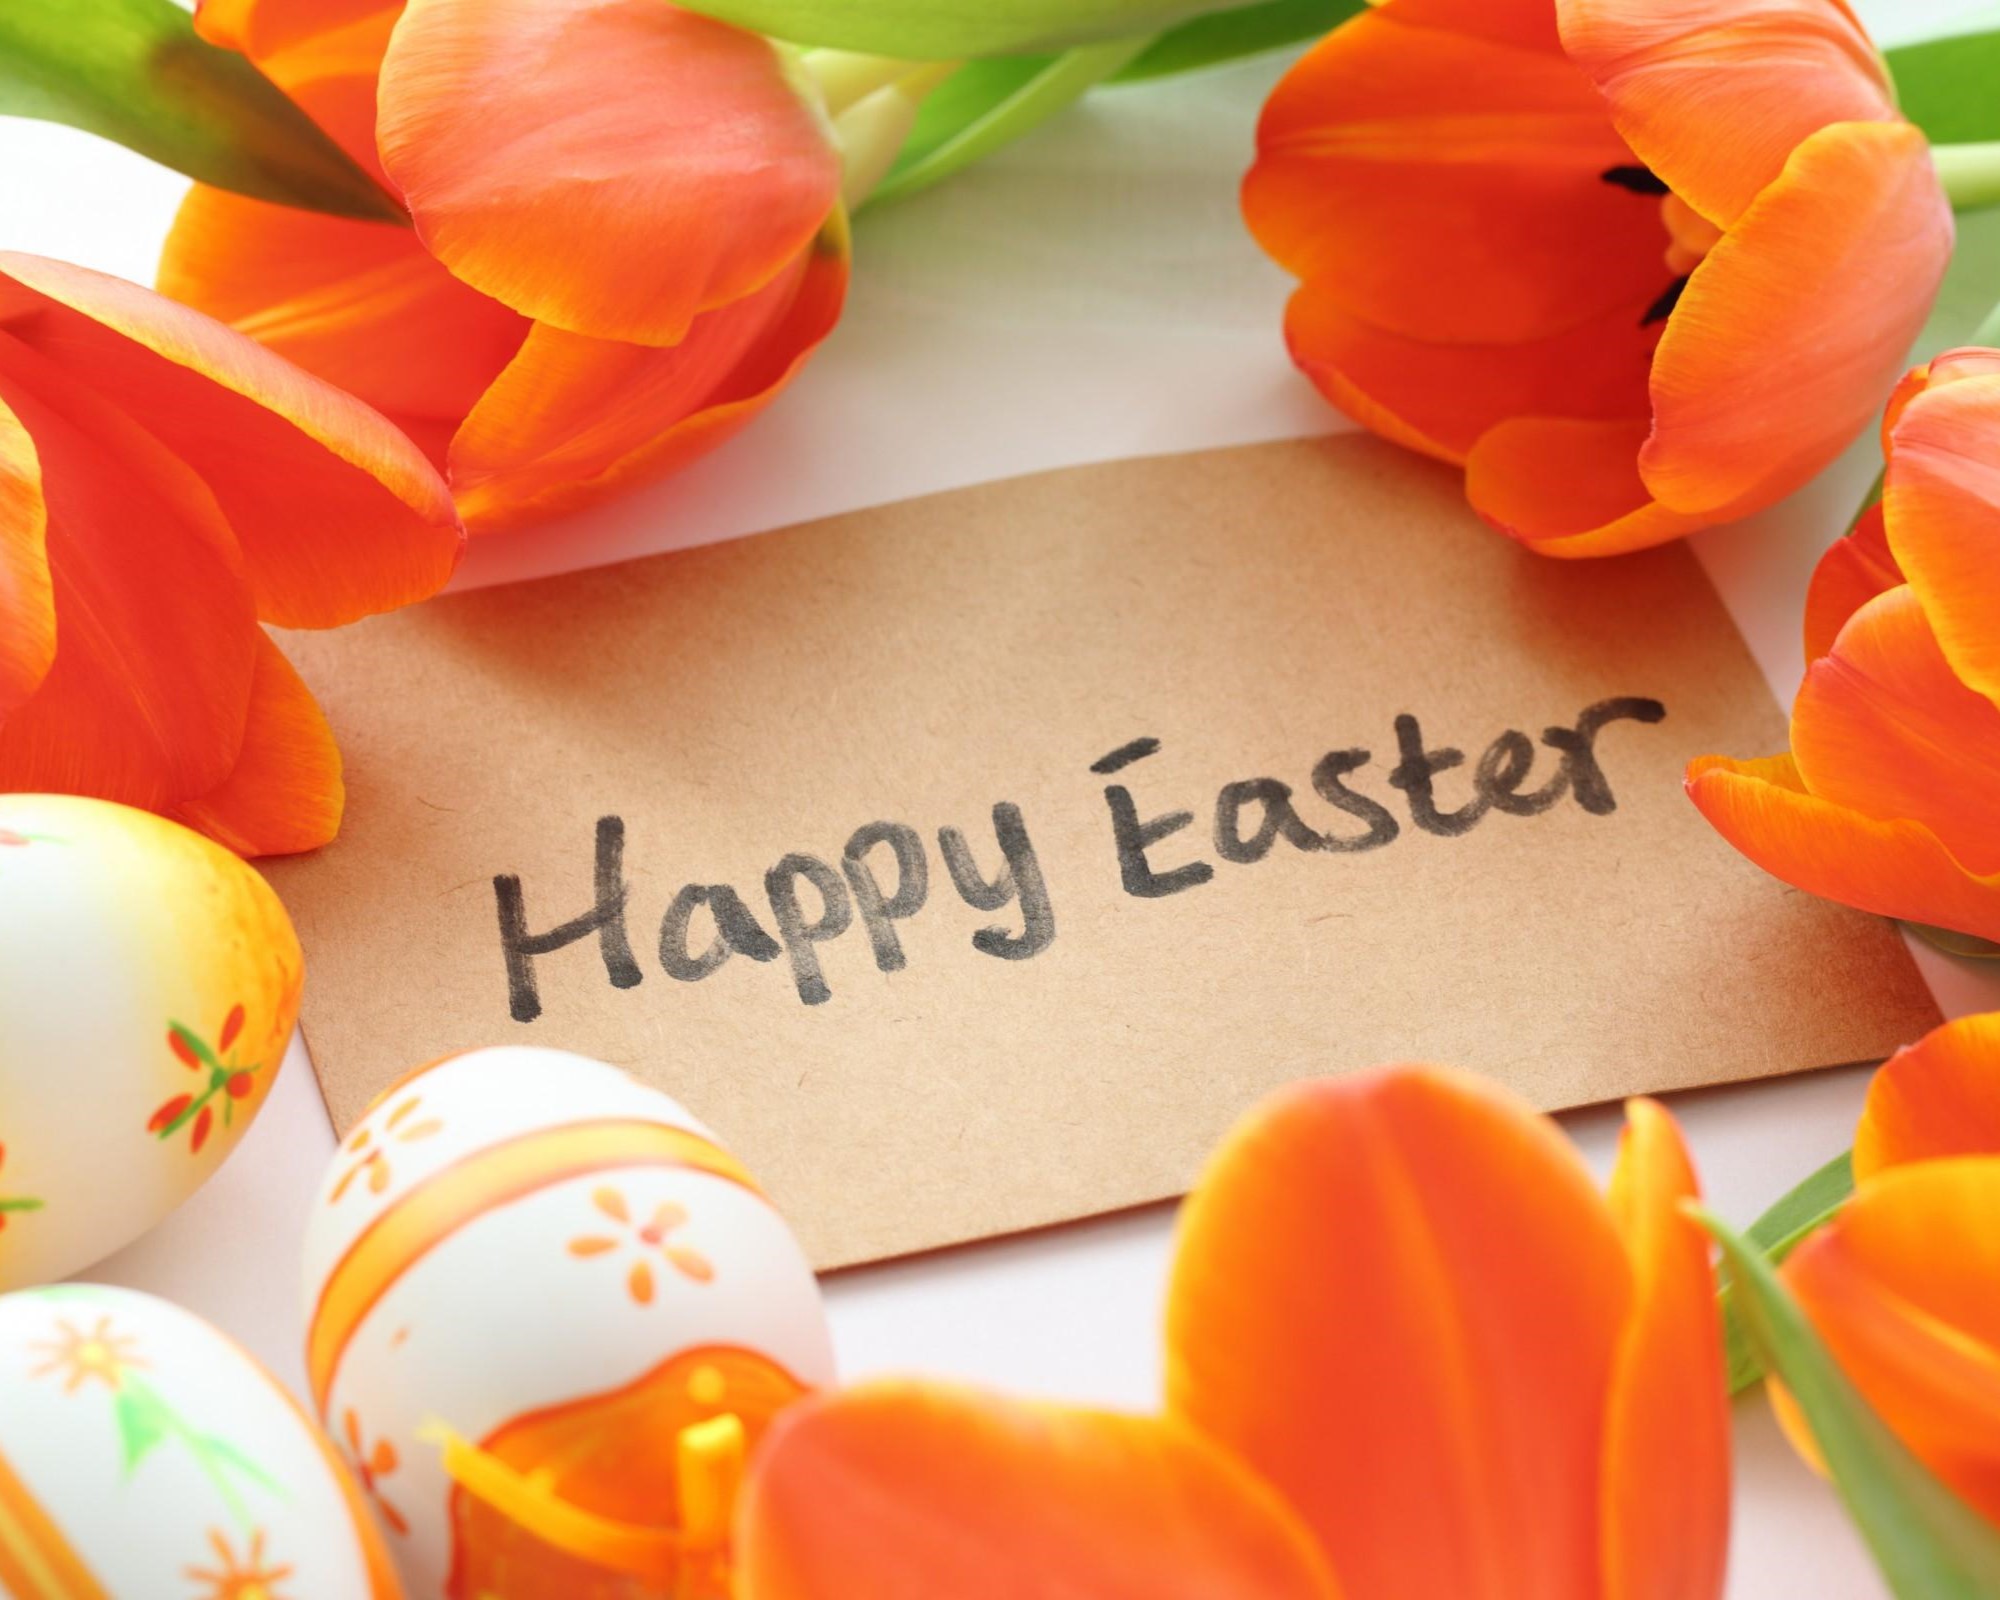 Happy Easter from Ashton Seals